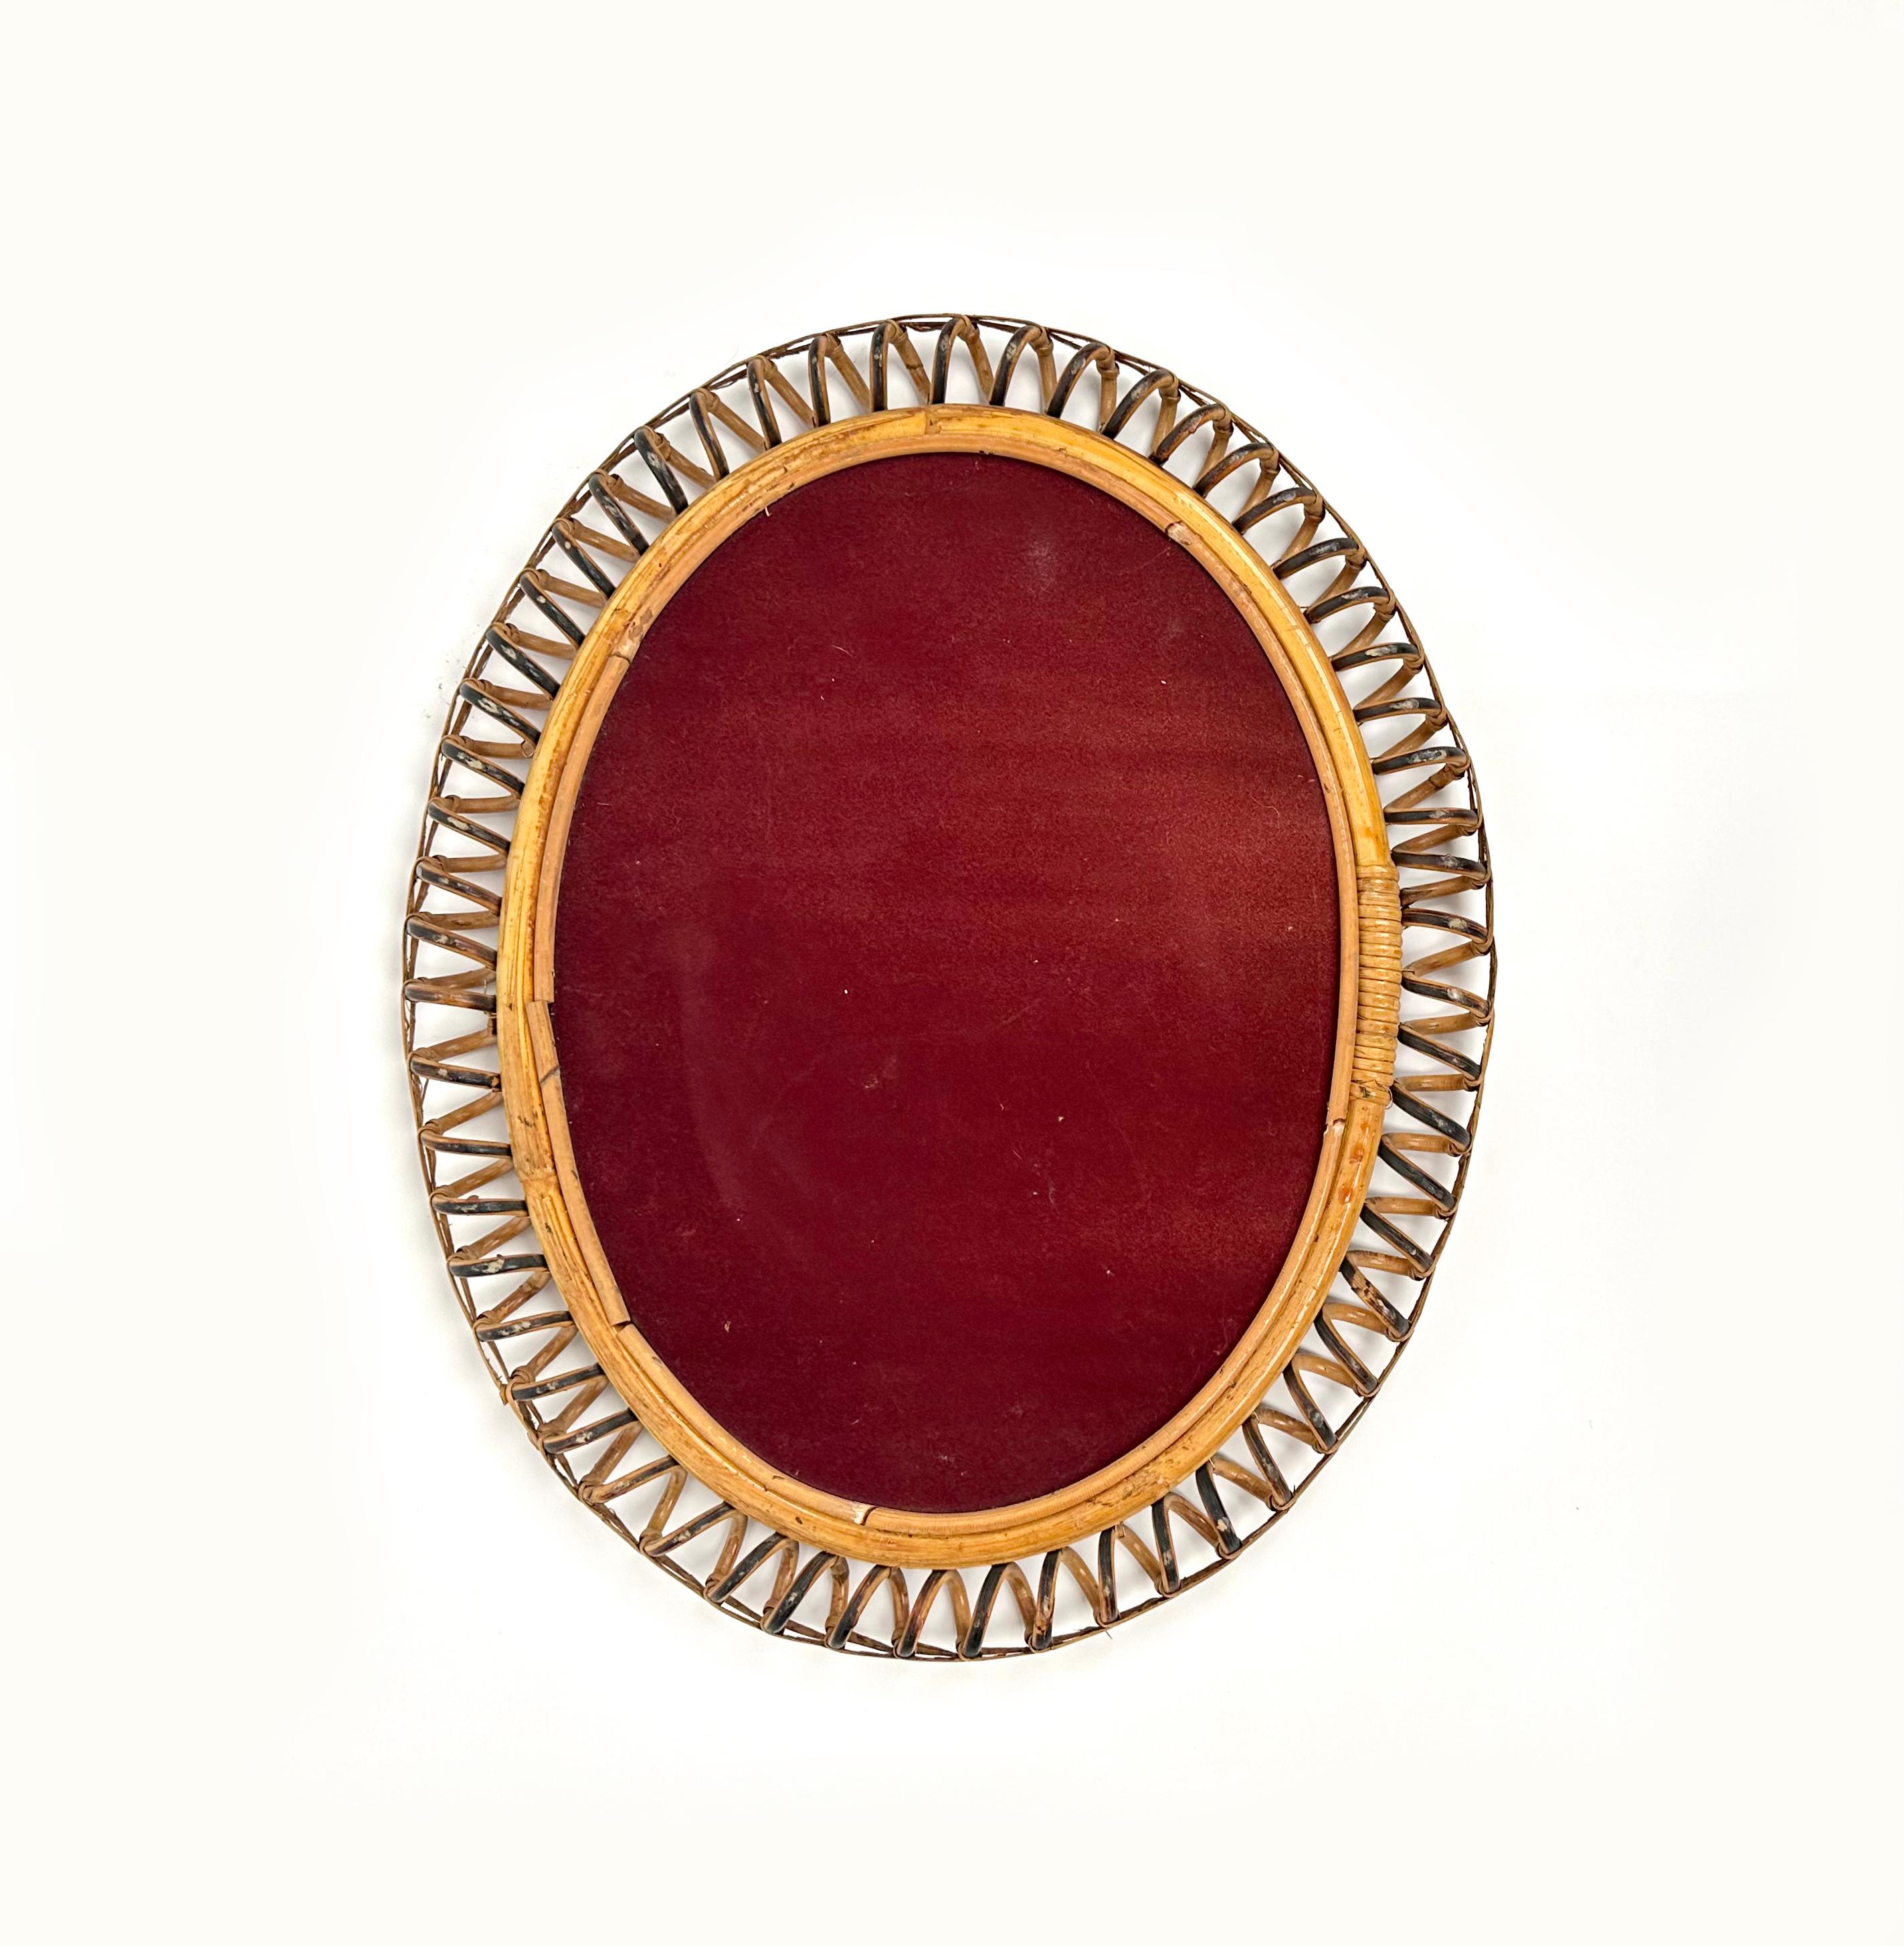 Midcentury Rattan and Bamboo Oval Wall Mirror Franco Albini Style, Italy 1960s For Sale 1